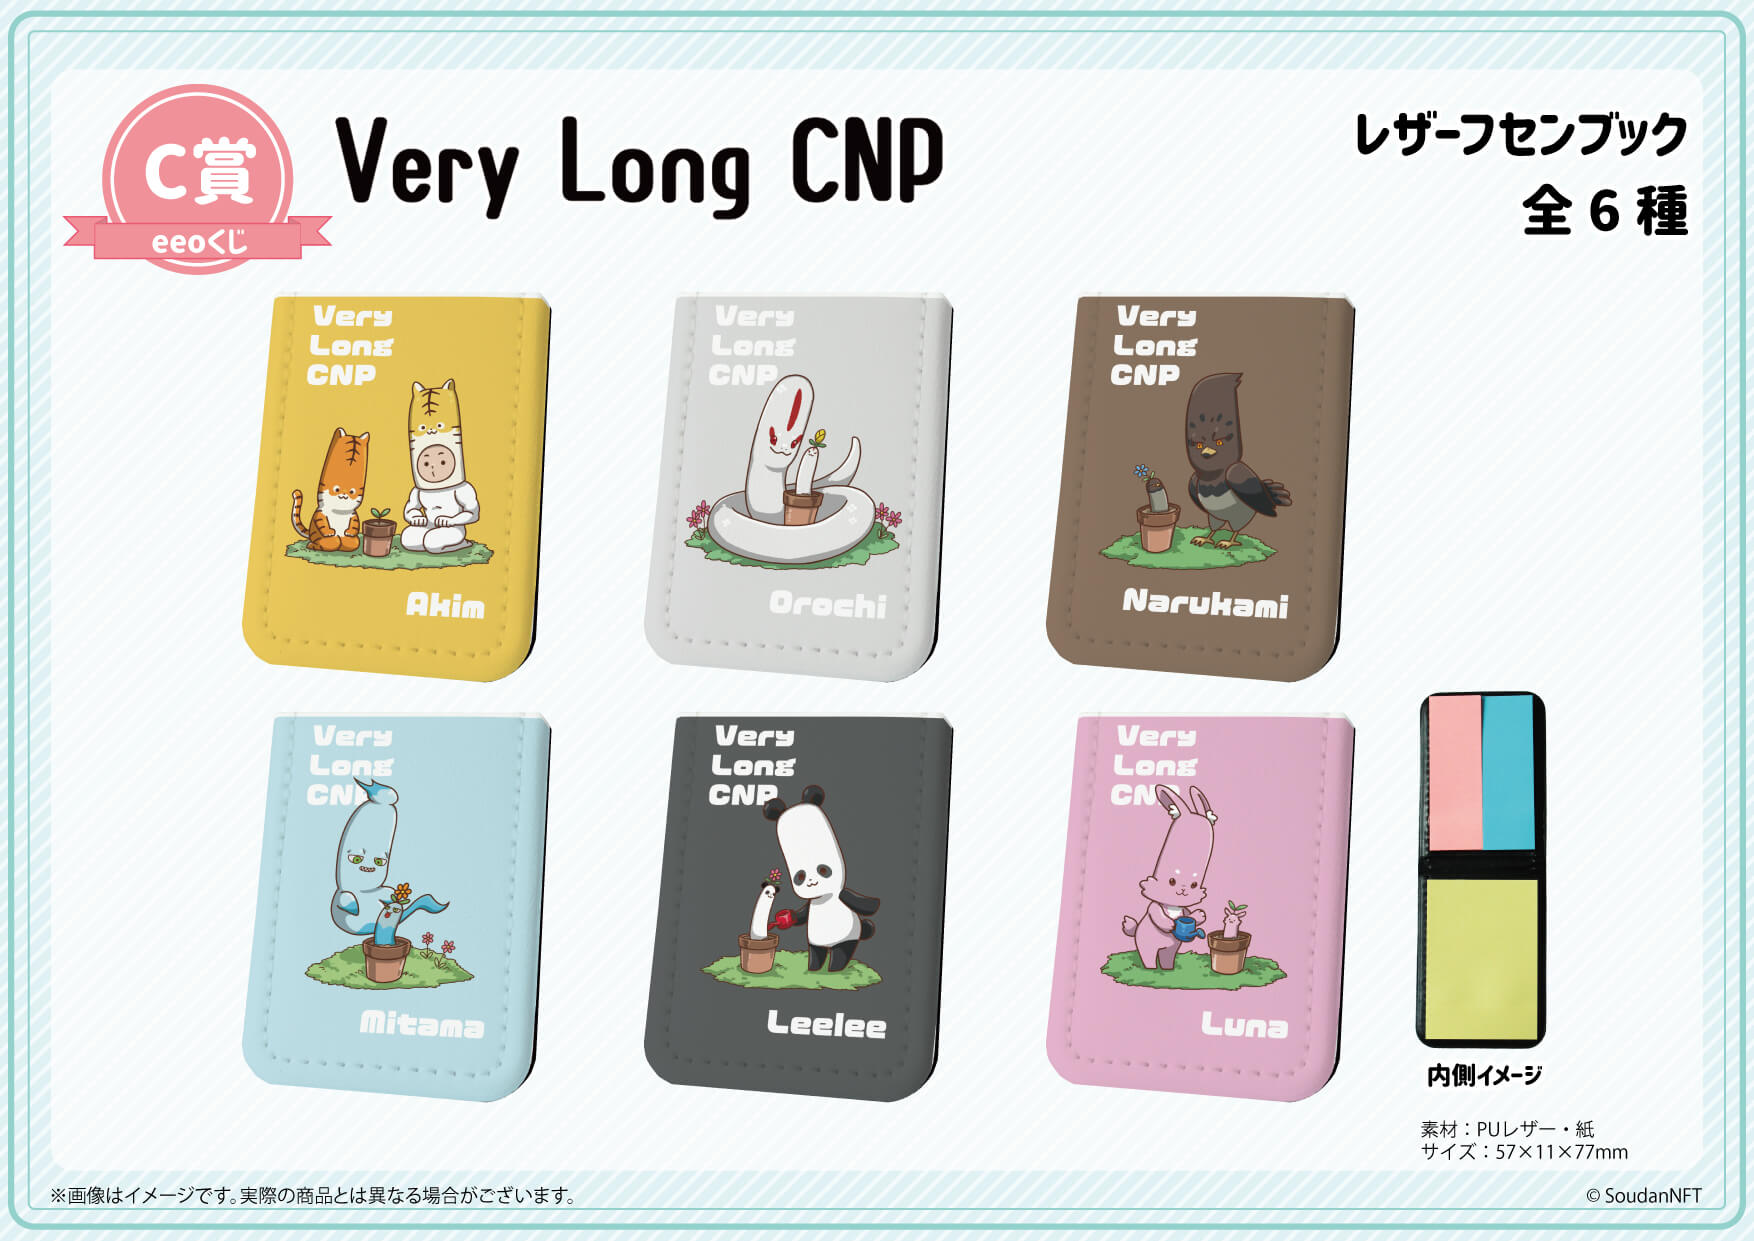 【eeoくじ】「Very Long CNP」(公式イラスト)